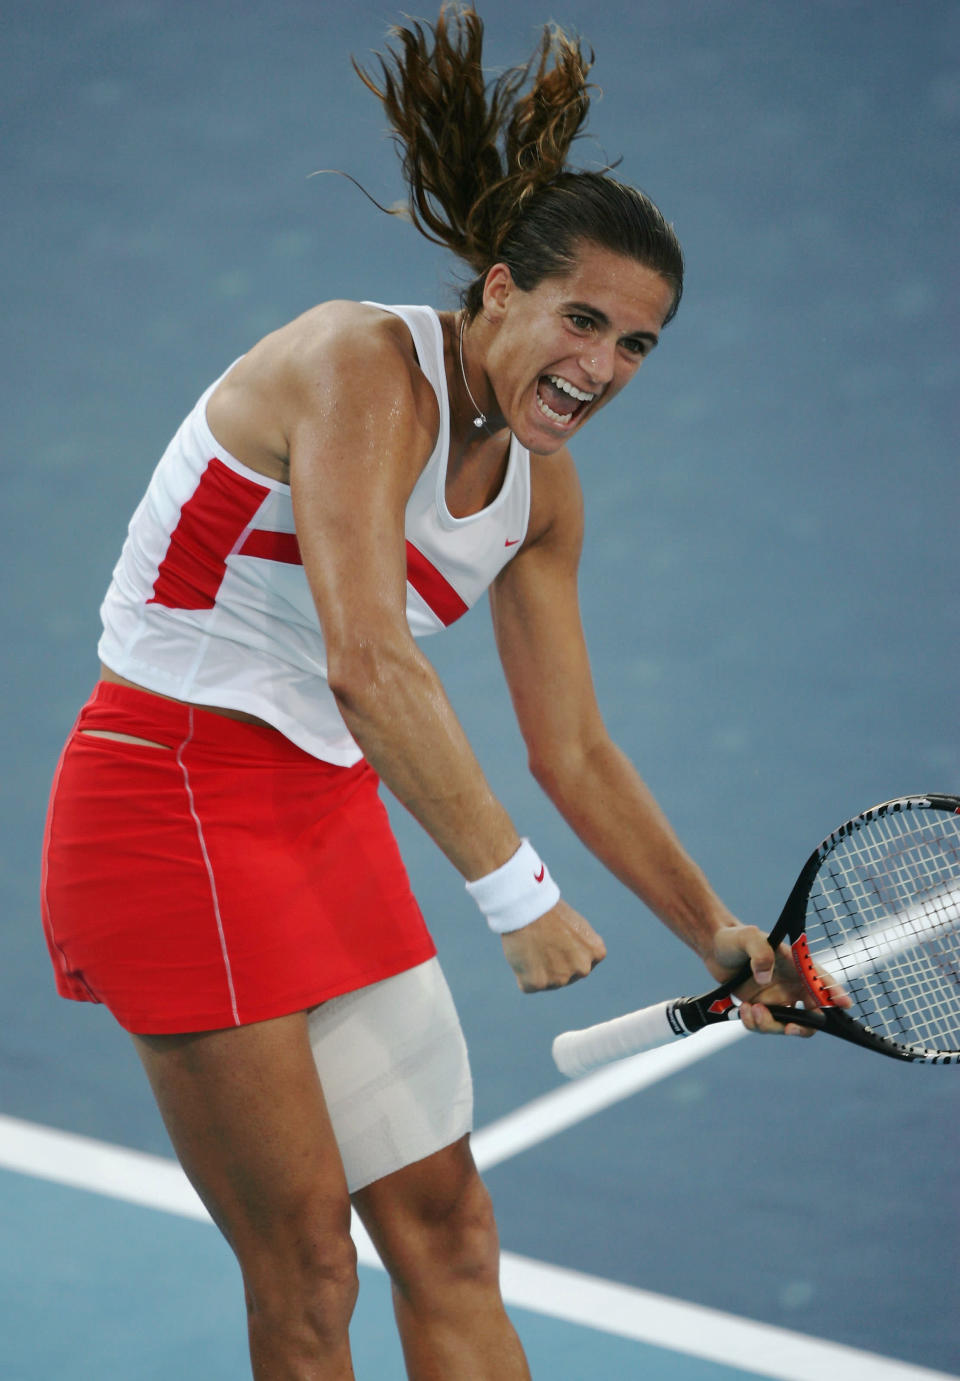 ATHENS - AUGUST 19: Amelie Mauresmo of France celebrates her win over Svetlana Kuzentsova of Russia in the women's singles tennis quarterfinal match on August 19, 2004 during the Athens 2004 Summer Olympic Games at the Olympic Sports Complex Tennis Centre in Athens, Greece. (Photo by Clive Brunskill/Getty Images)